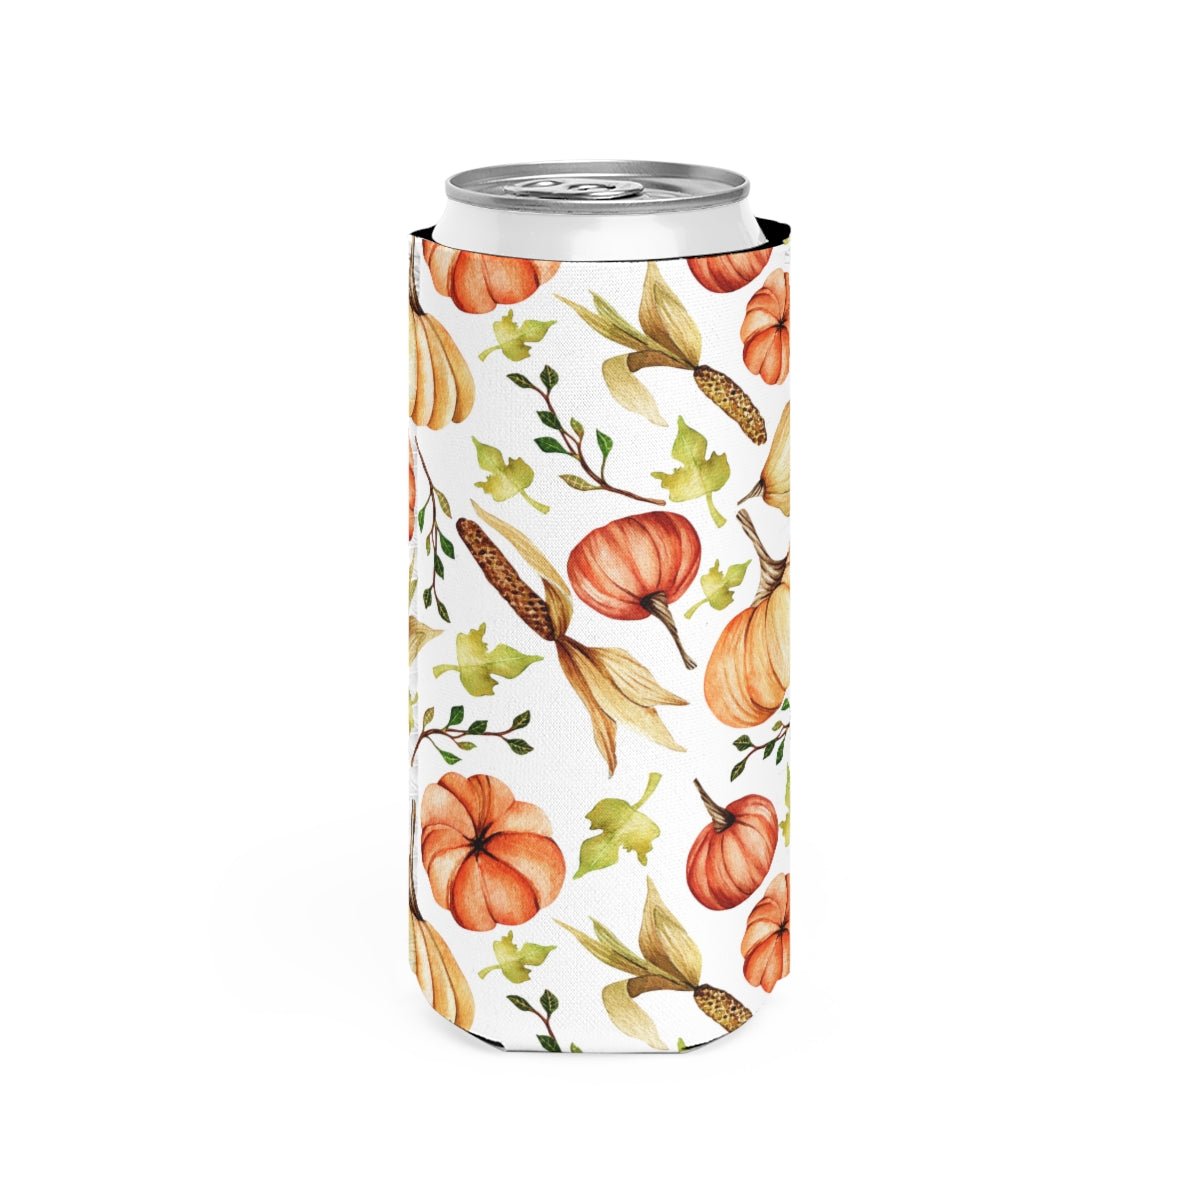 Fall Pumpkins and Corn Slim Can Cooler - Puffin Lime